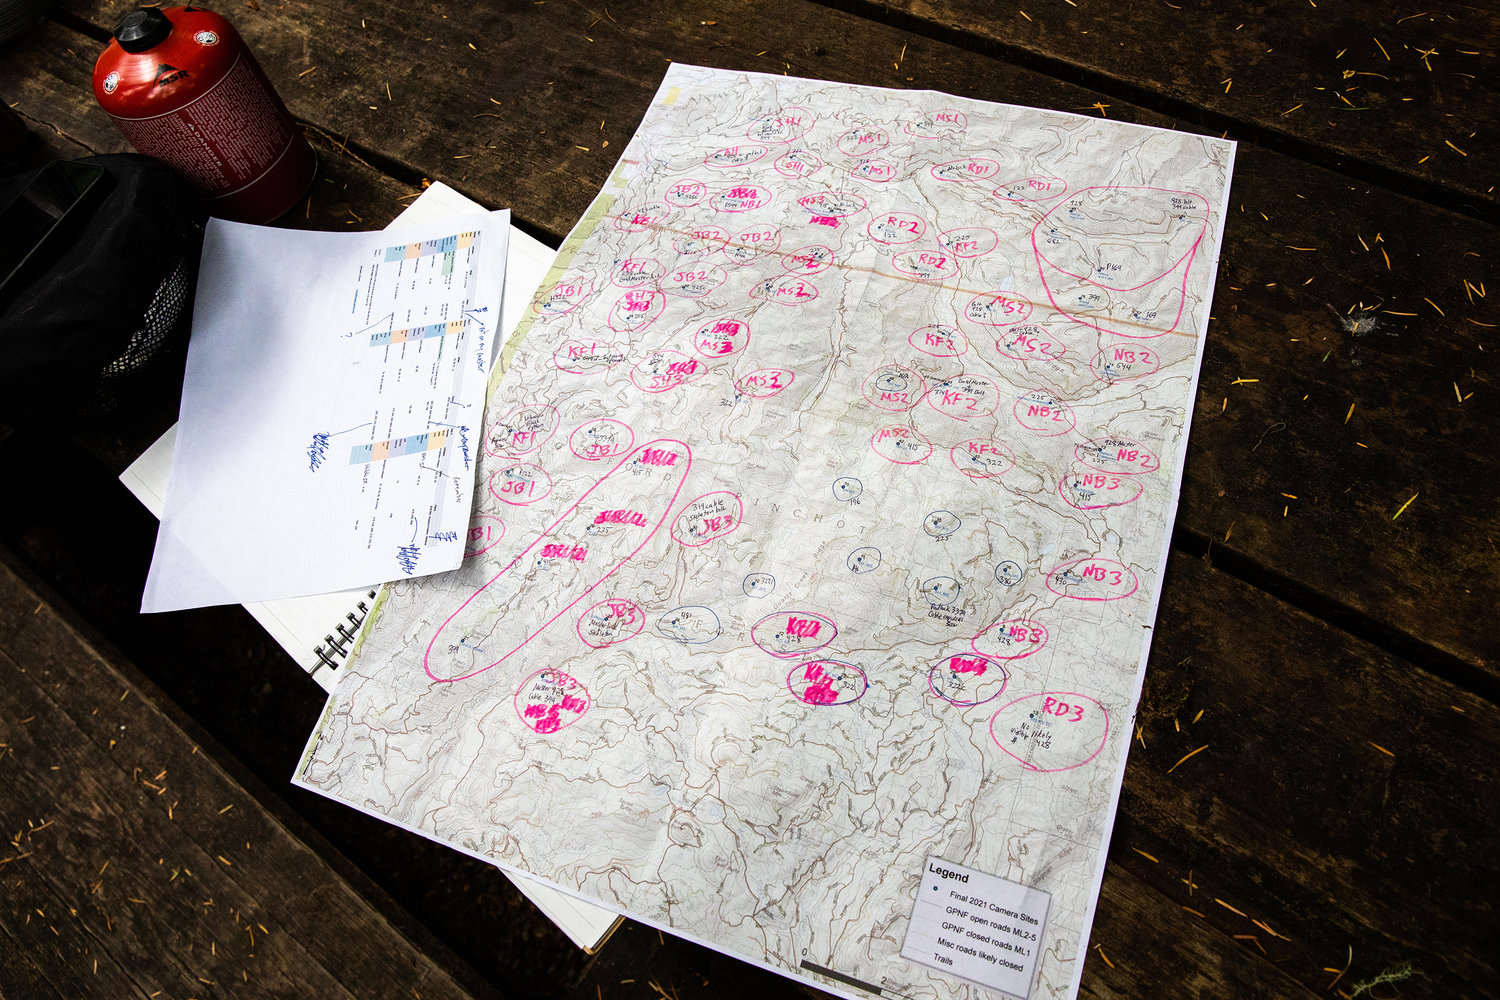 A map marks game camera locations around the Gifford Pinchot National Forest Saturday morning at Iron Creek Campground.